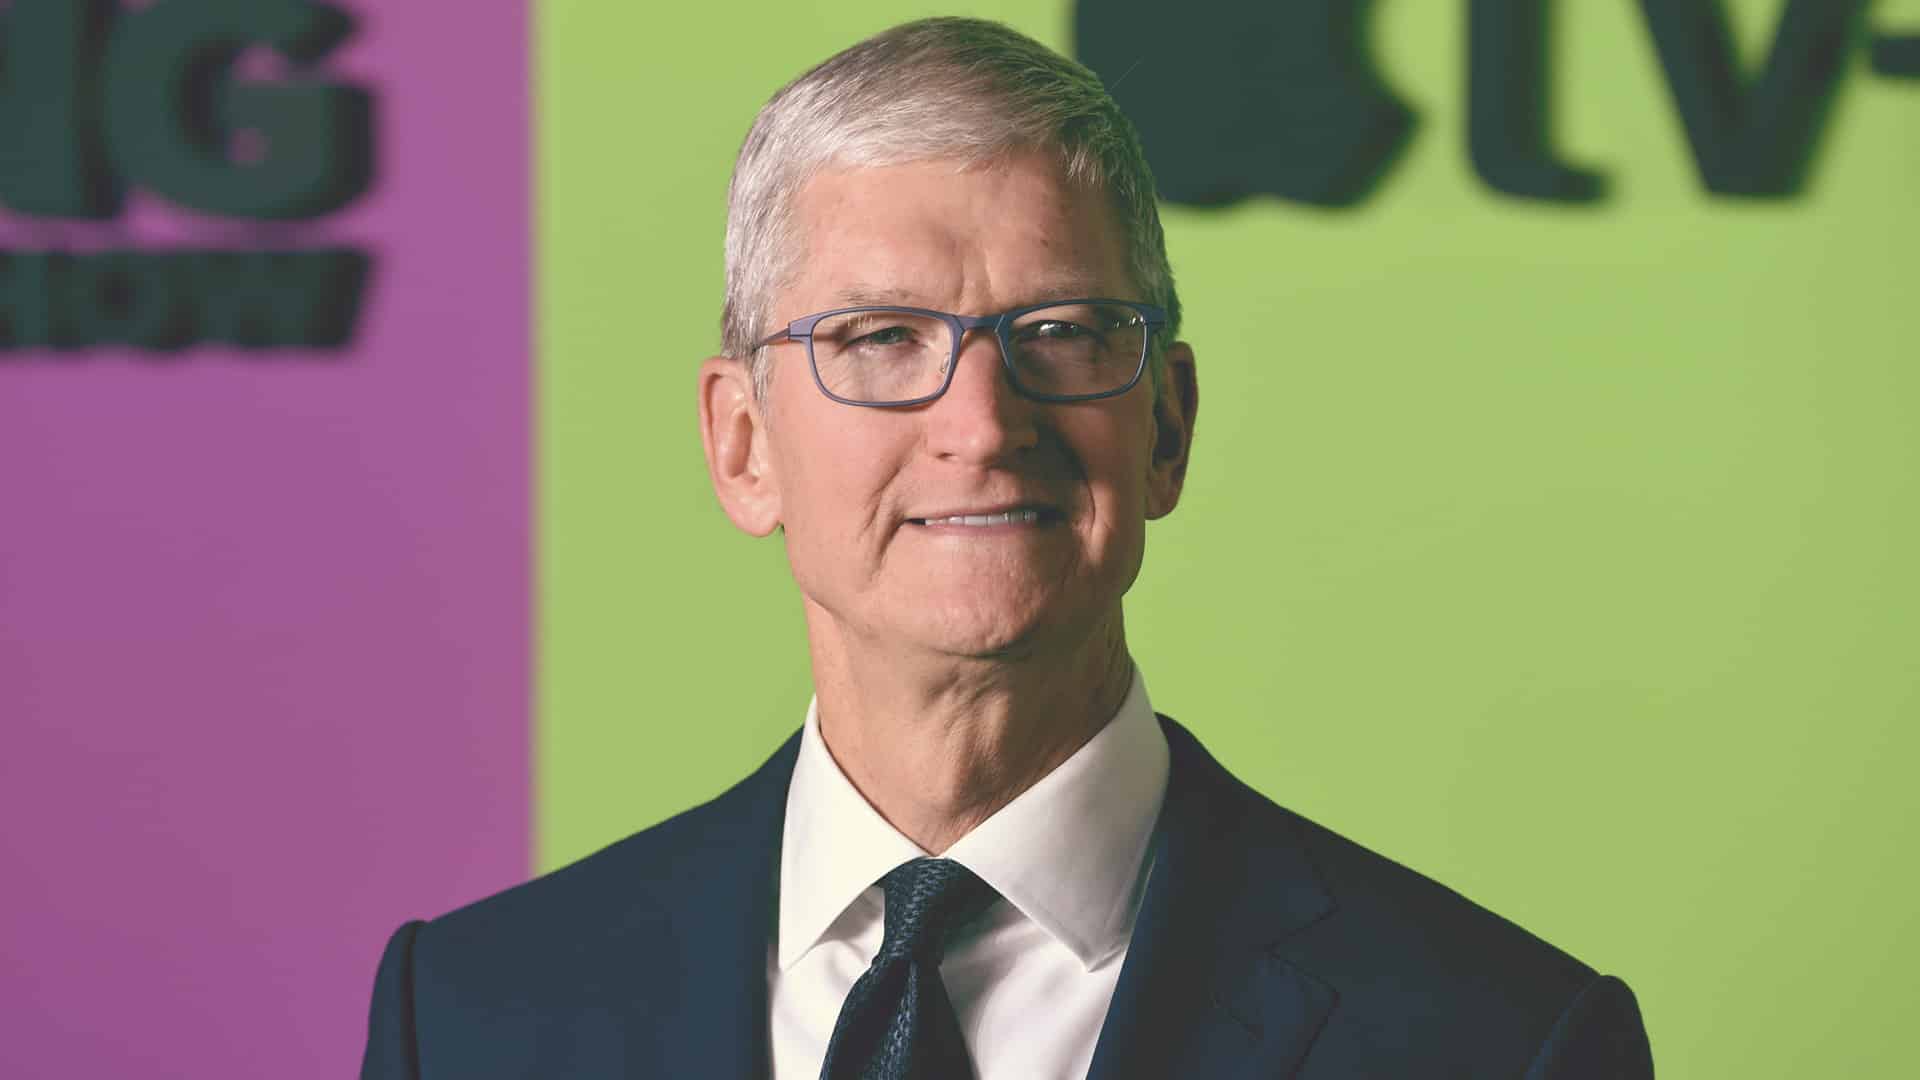 Apple's business in India still quite low relative to size of opportunity: Tim Cook